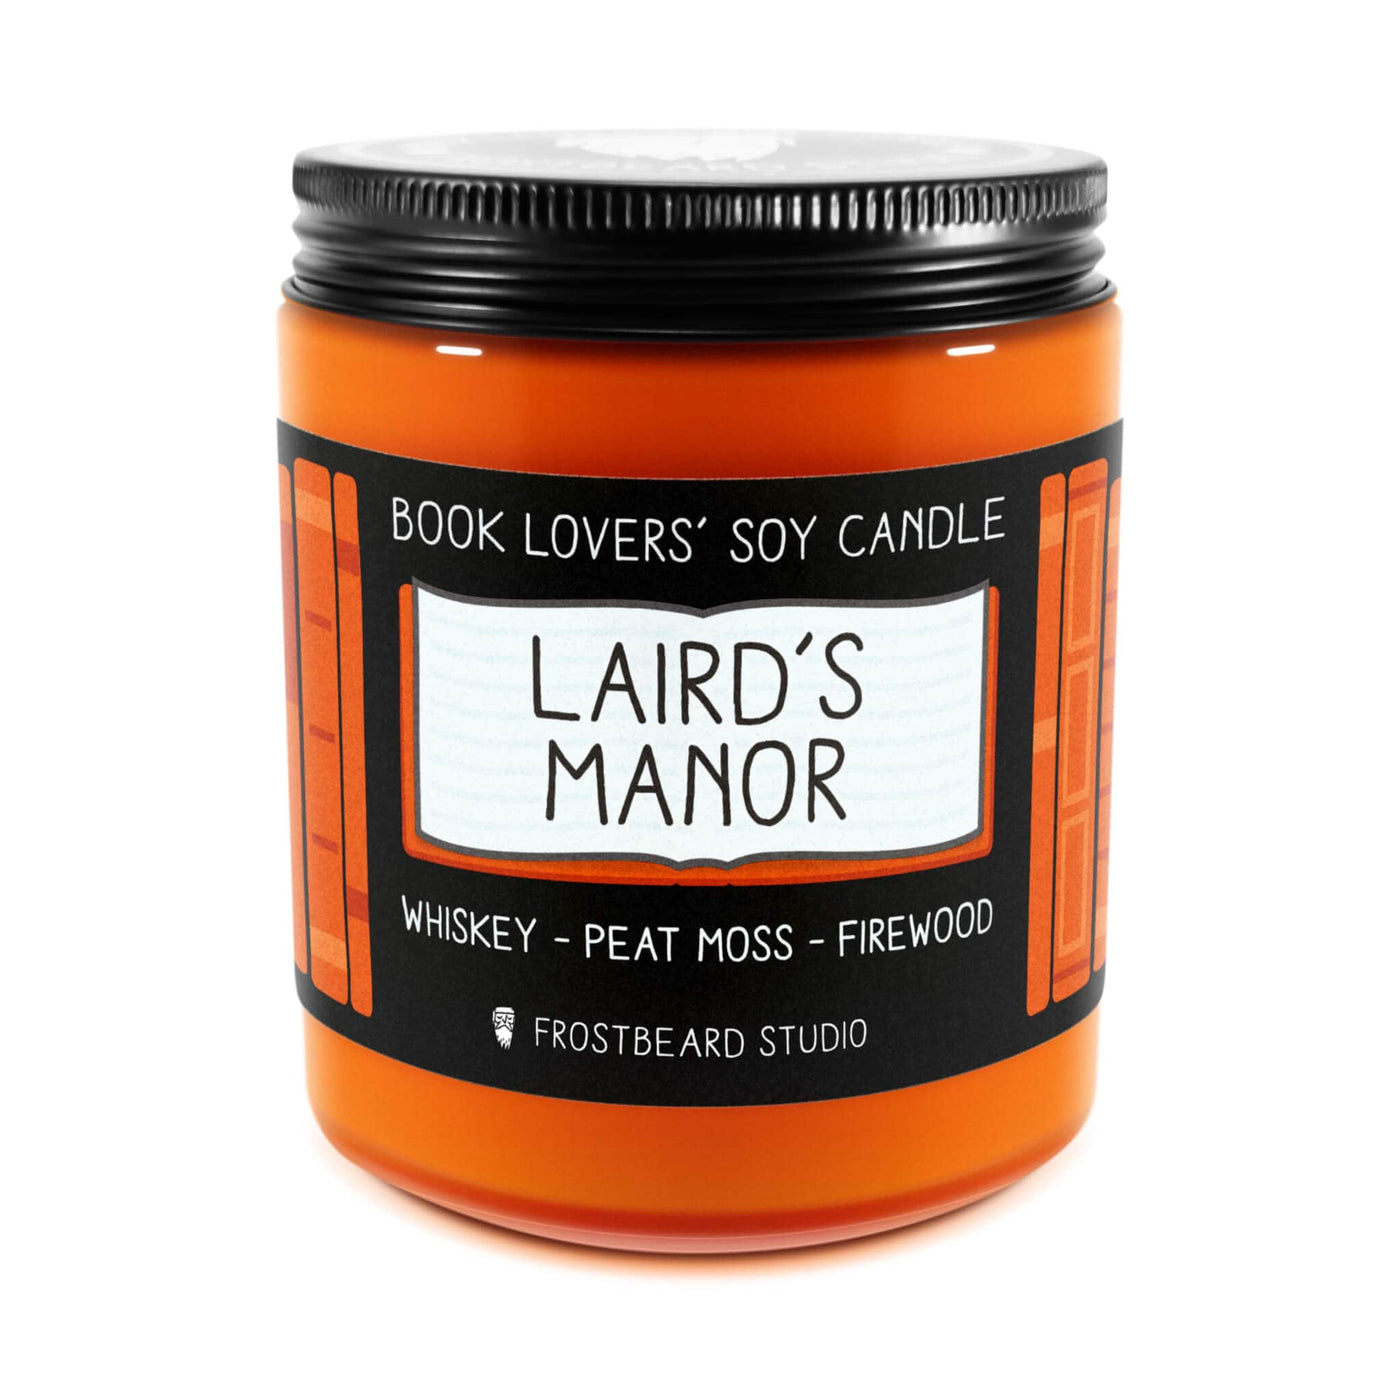 Laird's Manor  -  8 oz Jar  -  Book Lovers' Soy Candle  -  Frostbeard Studio